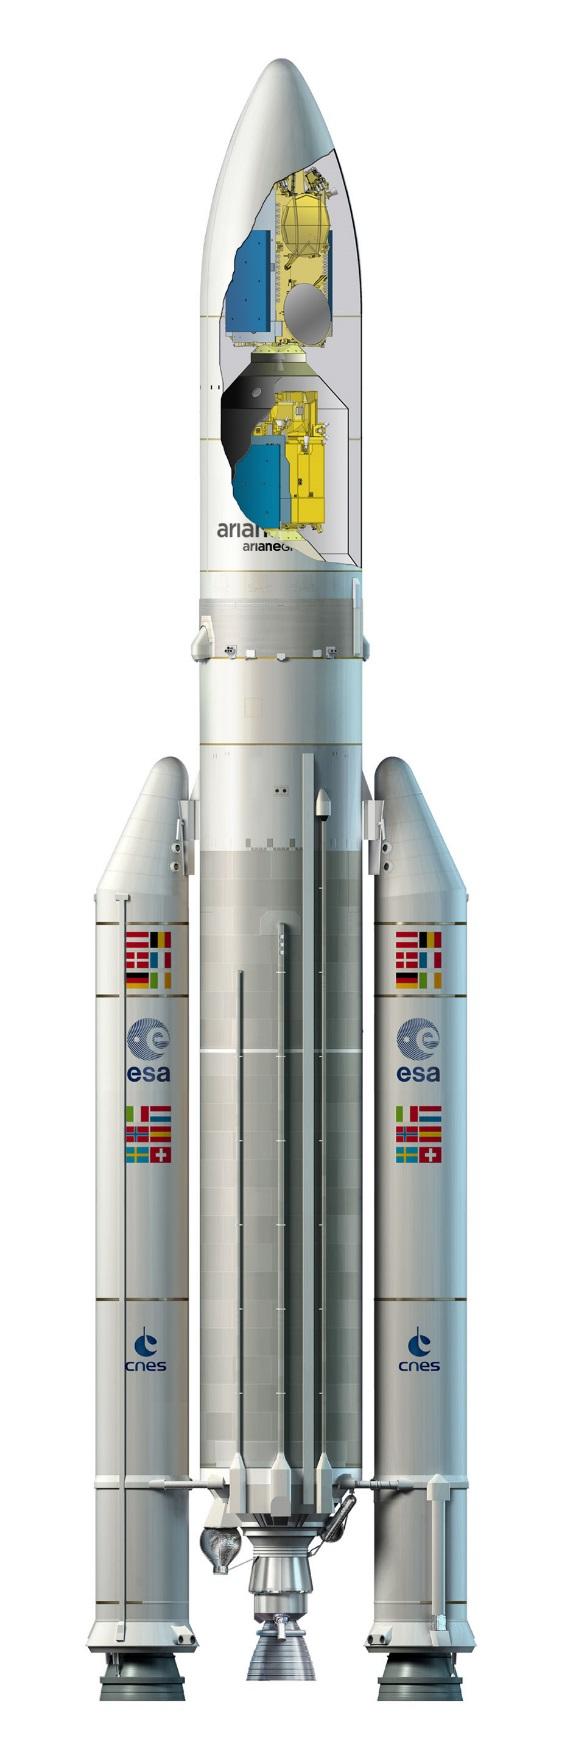 ARIANE 5 ECA LAUNCH VEHICLE The launcher is delivered to Arianespace by ArianeGroup as production prime contractor. 54.8 m. Fairing (RUAG Space): 17 m. Mass: 2.4 t.